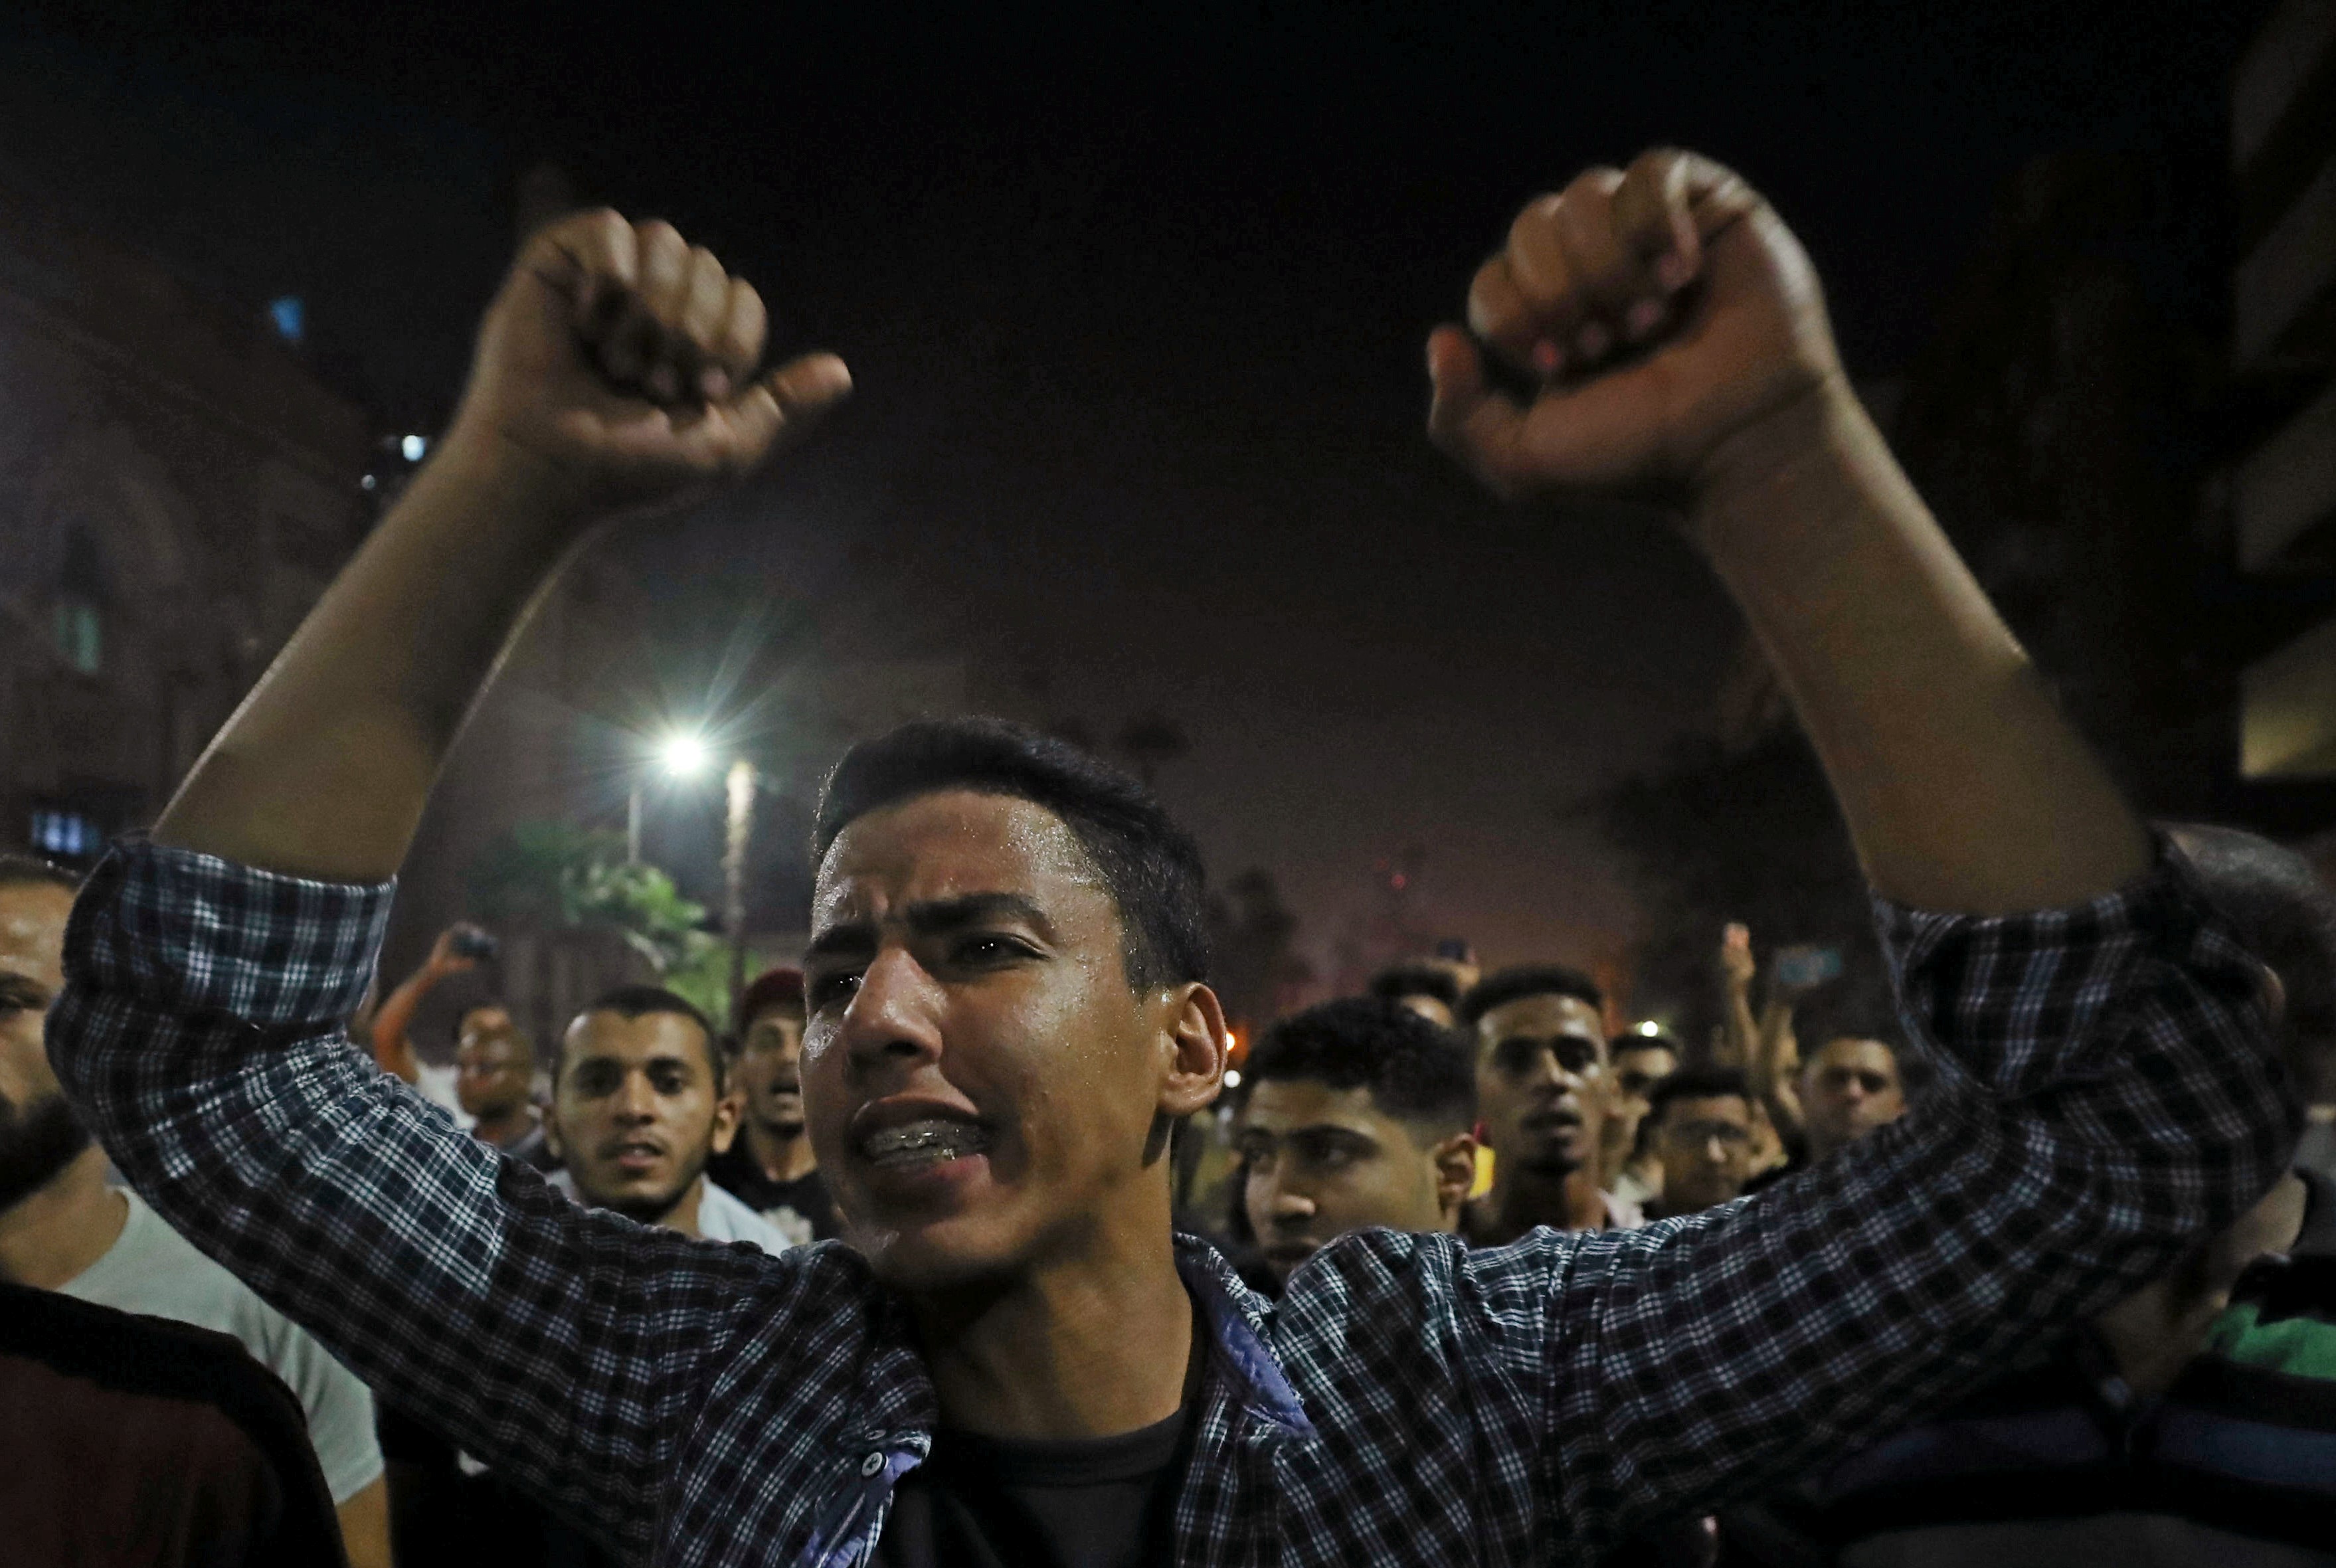 Small groups of protesters gather in central Cairo shouting anti-government slogans in Cairo on 21 September (Reuters)